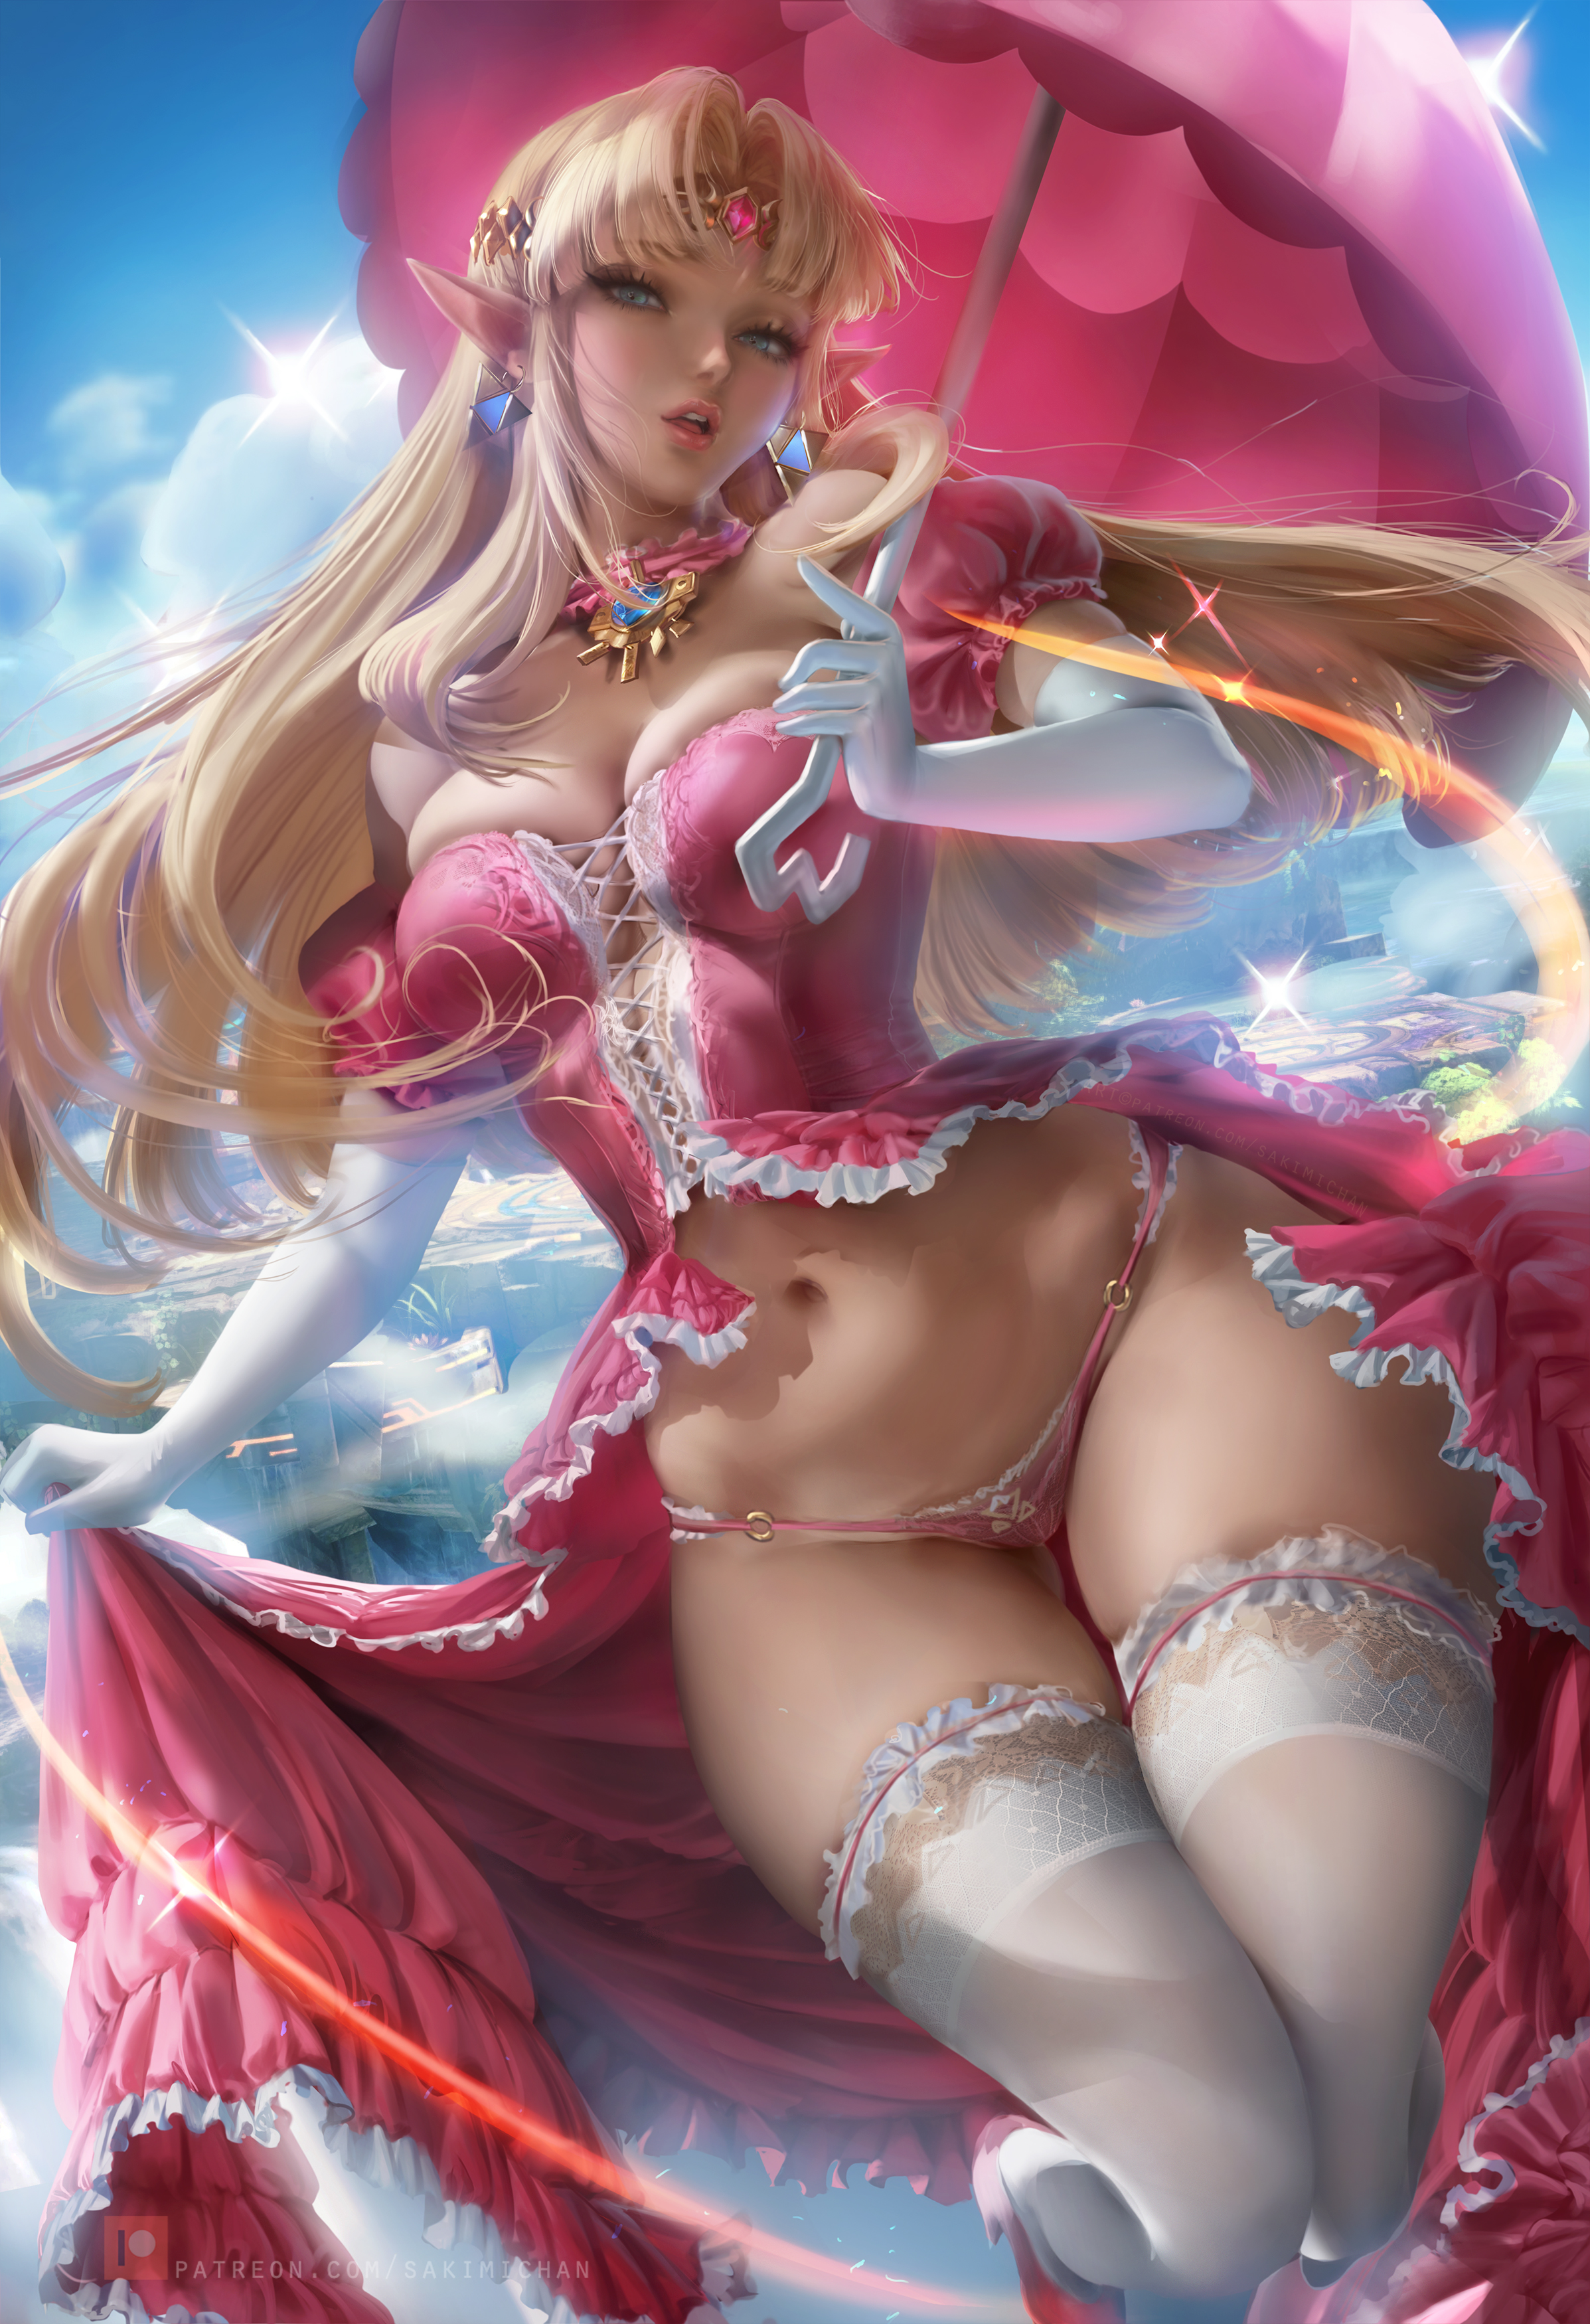 General 2395x3500 Zelda The Legend of Zelda Mario Bros. crossover elves fantasy girl pointy ears blue eyes looking at viewer parted lips choker bare shoulders cleavage dress pink dress umbrella elbow gloves belly panties pink panties underwear thick thigh lingerie stockings white stockings sparkles clouds sky artwork portrait display digital art video game characters drawing fan art Sakimichan The Legend of Zelda: Ocarina of Time